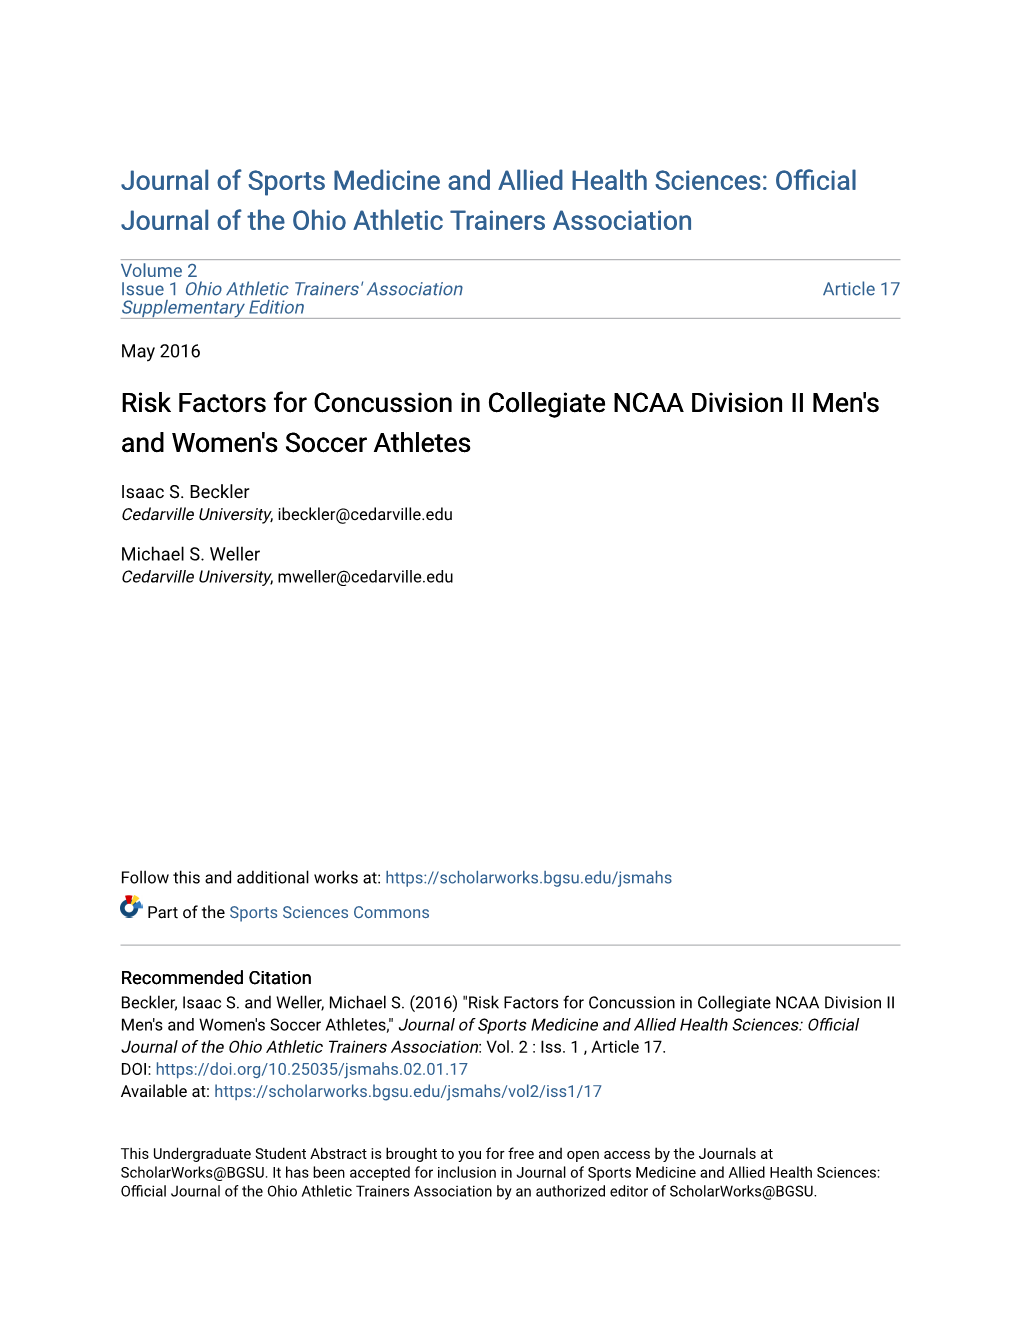 Risk Factors for Concussion in Collegiate NCAA Division II Men's and Women's Soccer Athletes